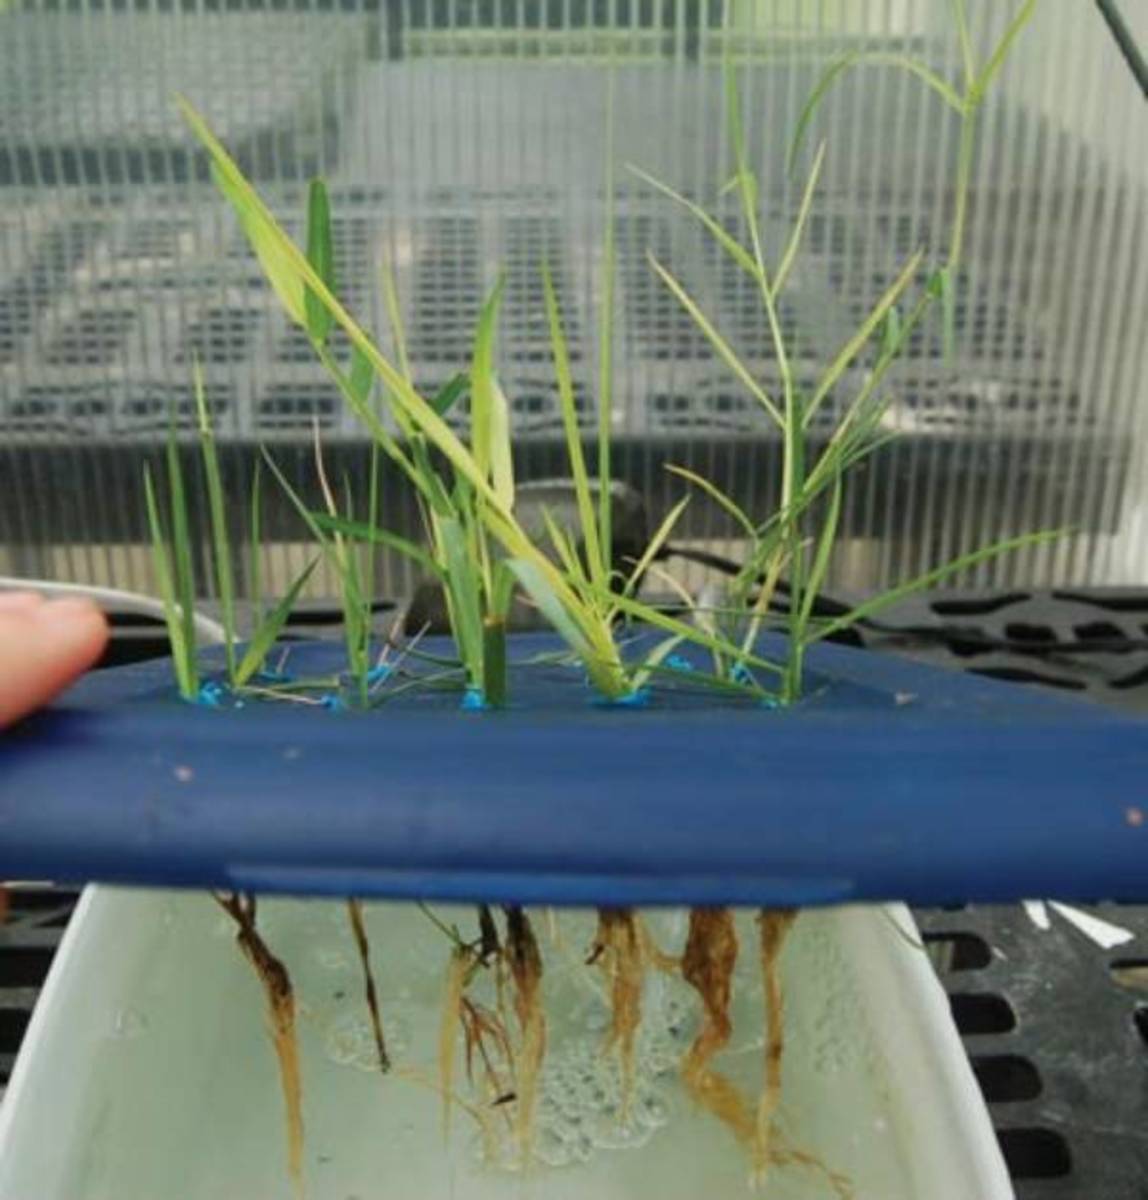 Zoysia grass turf is used in a hydroponic system.